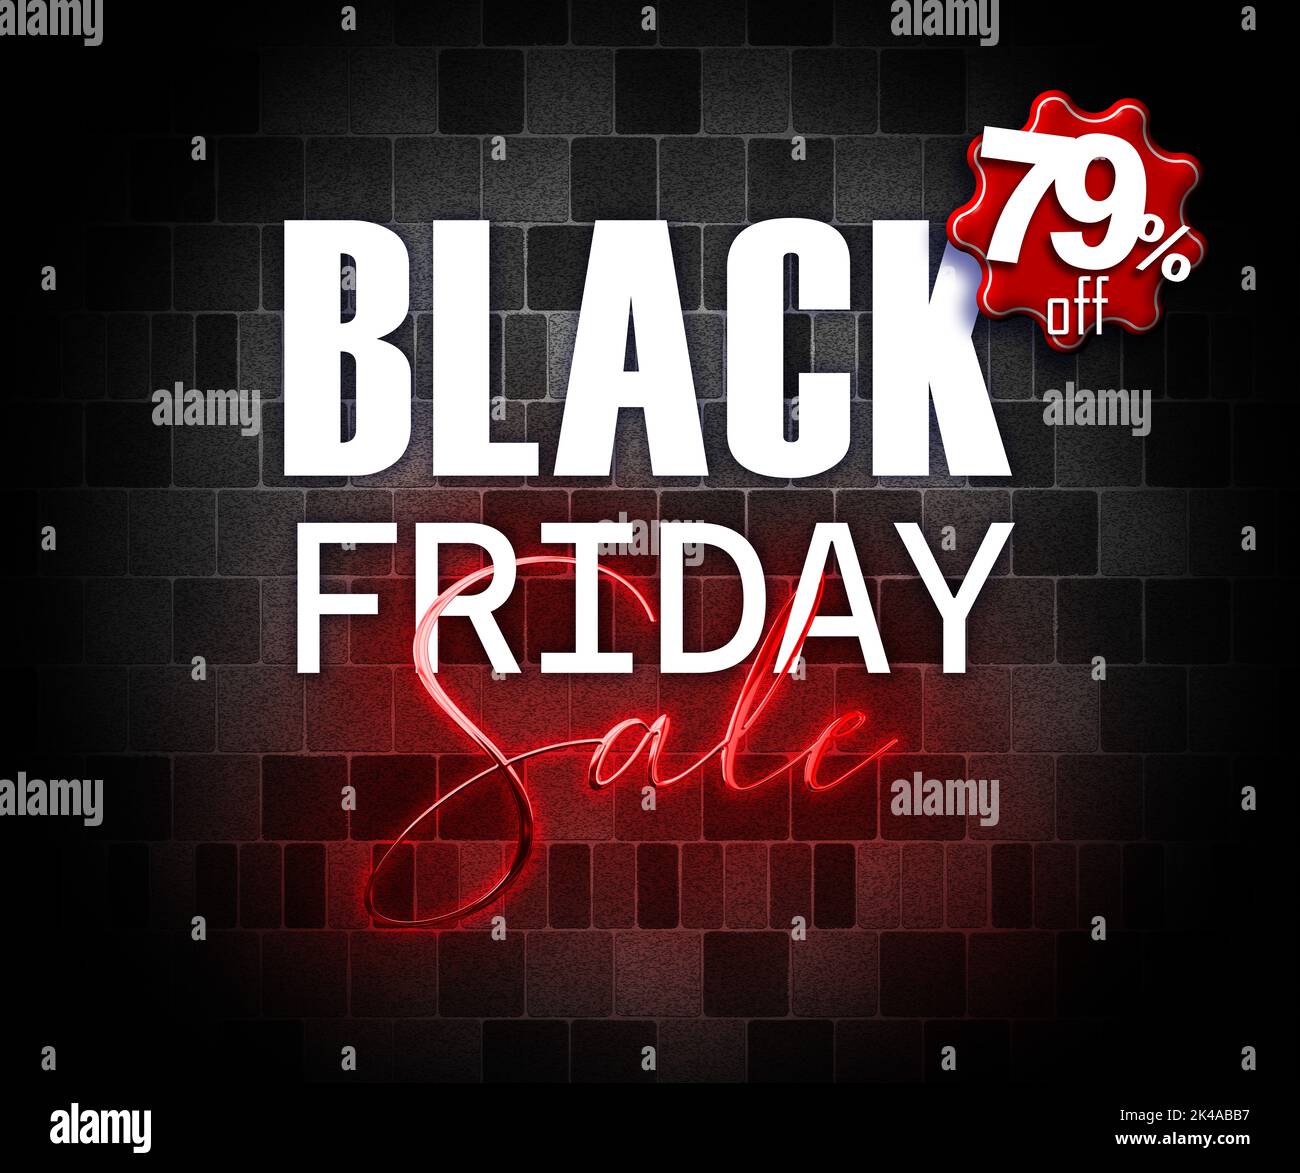 illustration with 3d elements black friday promotion banner 79 percent off sales increase Stock Photo